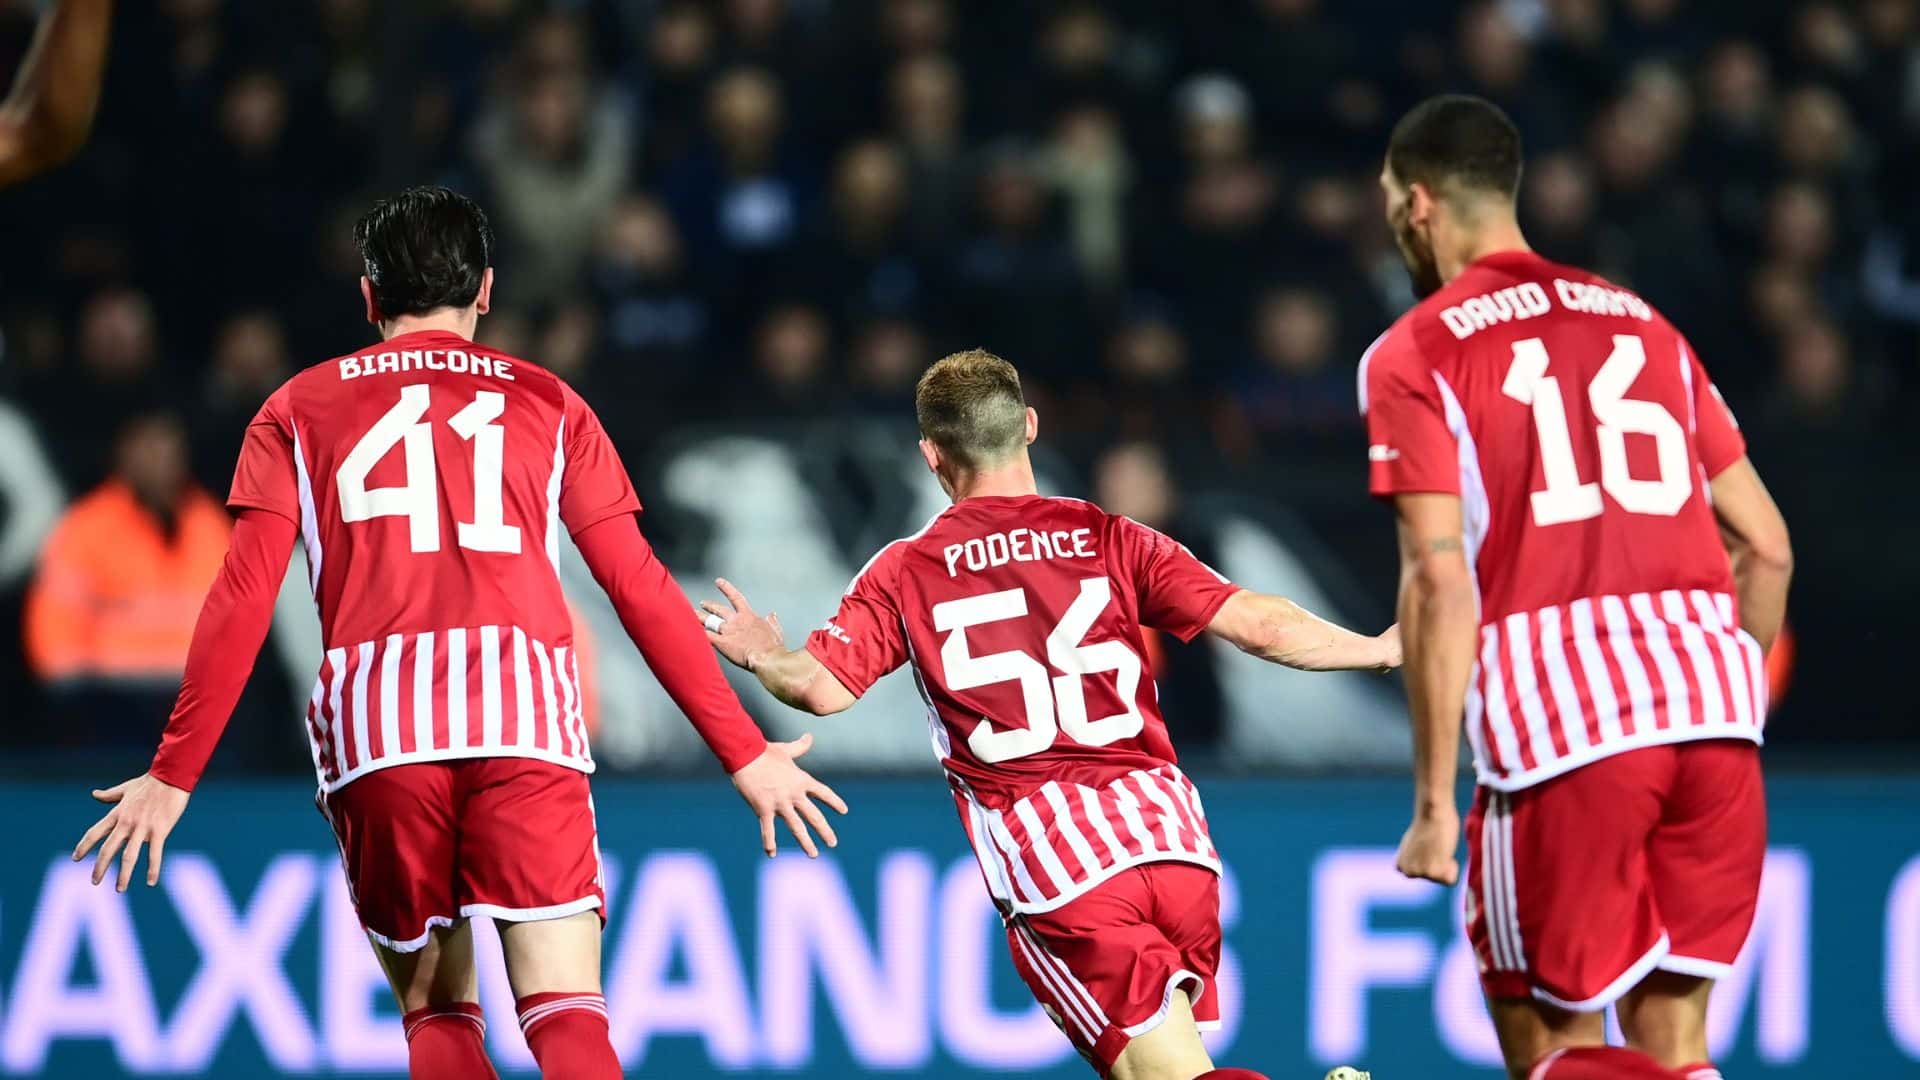 Podence Olympiacos 1